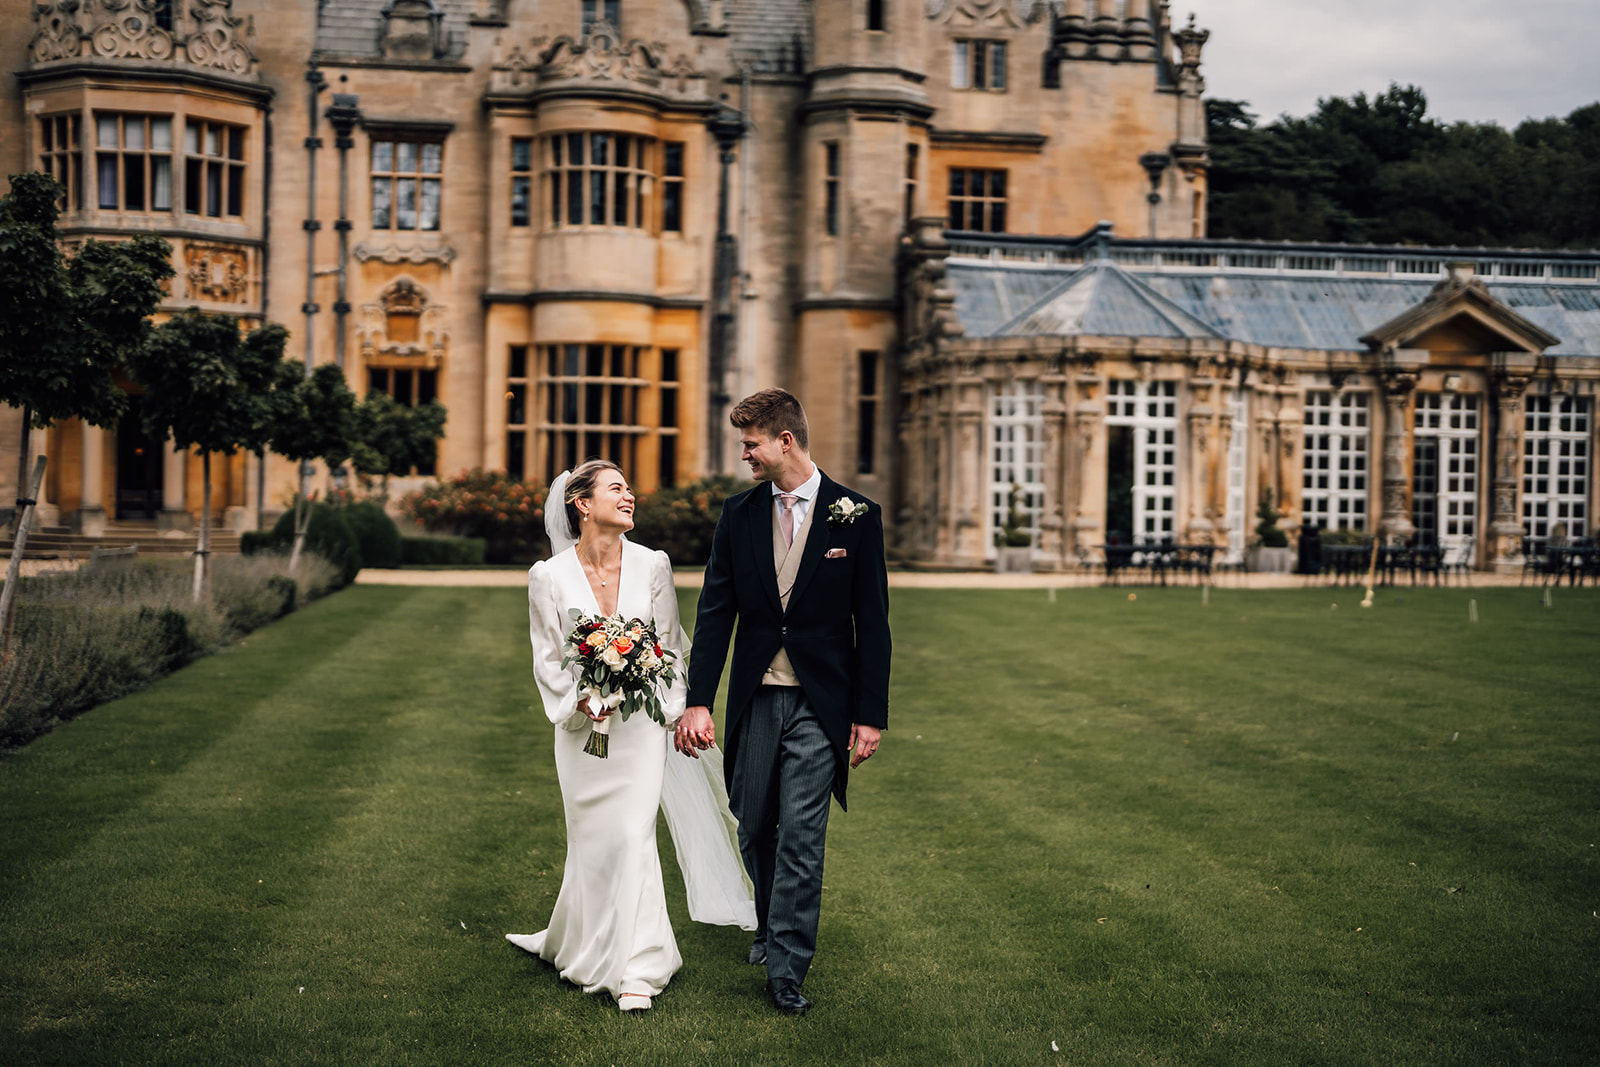 bride and groom walking across the lawns at Harlaxton Manor.